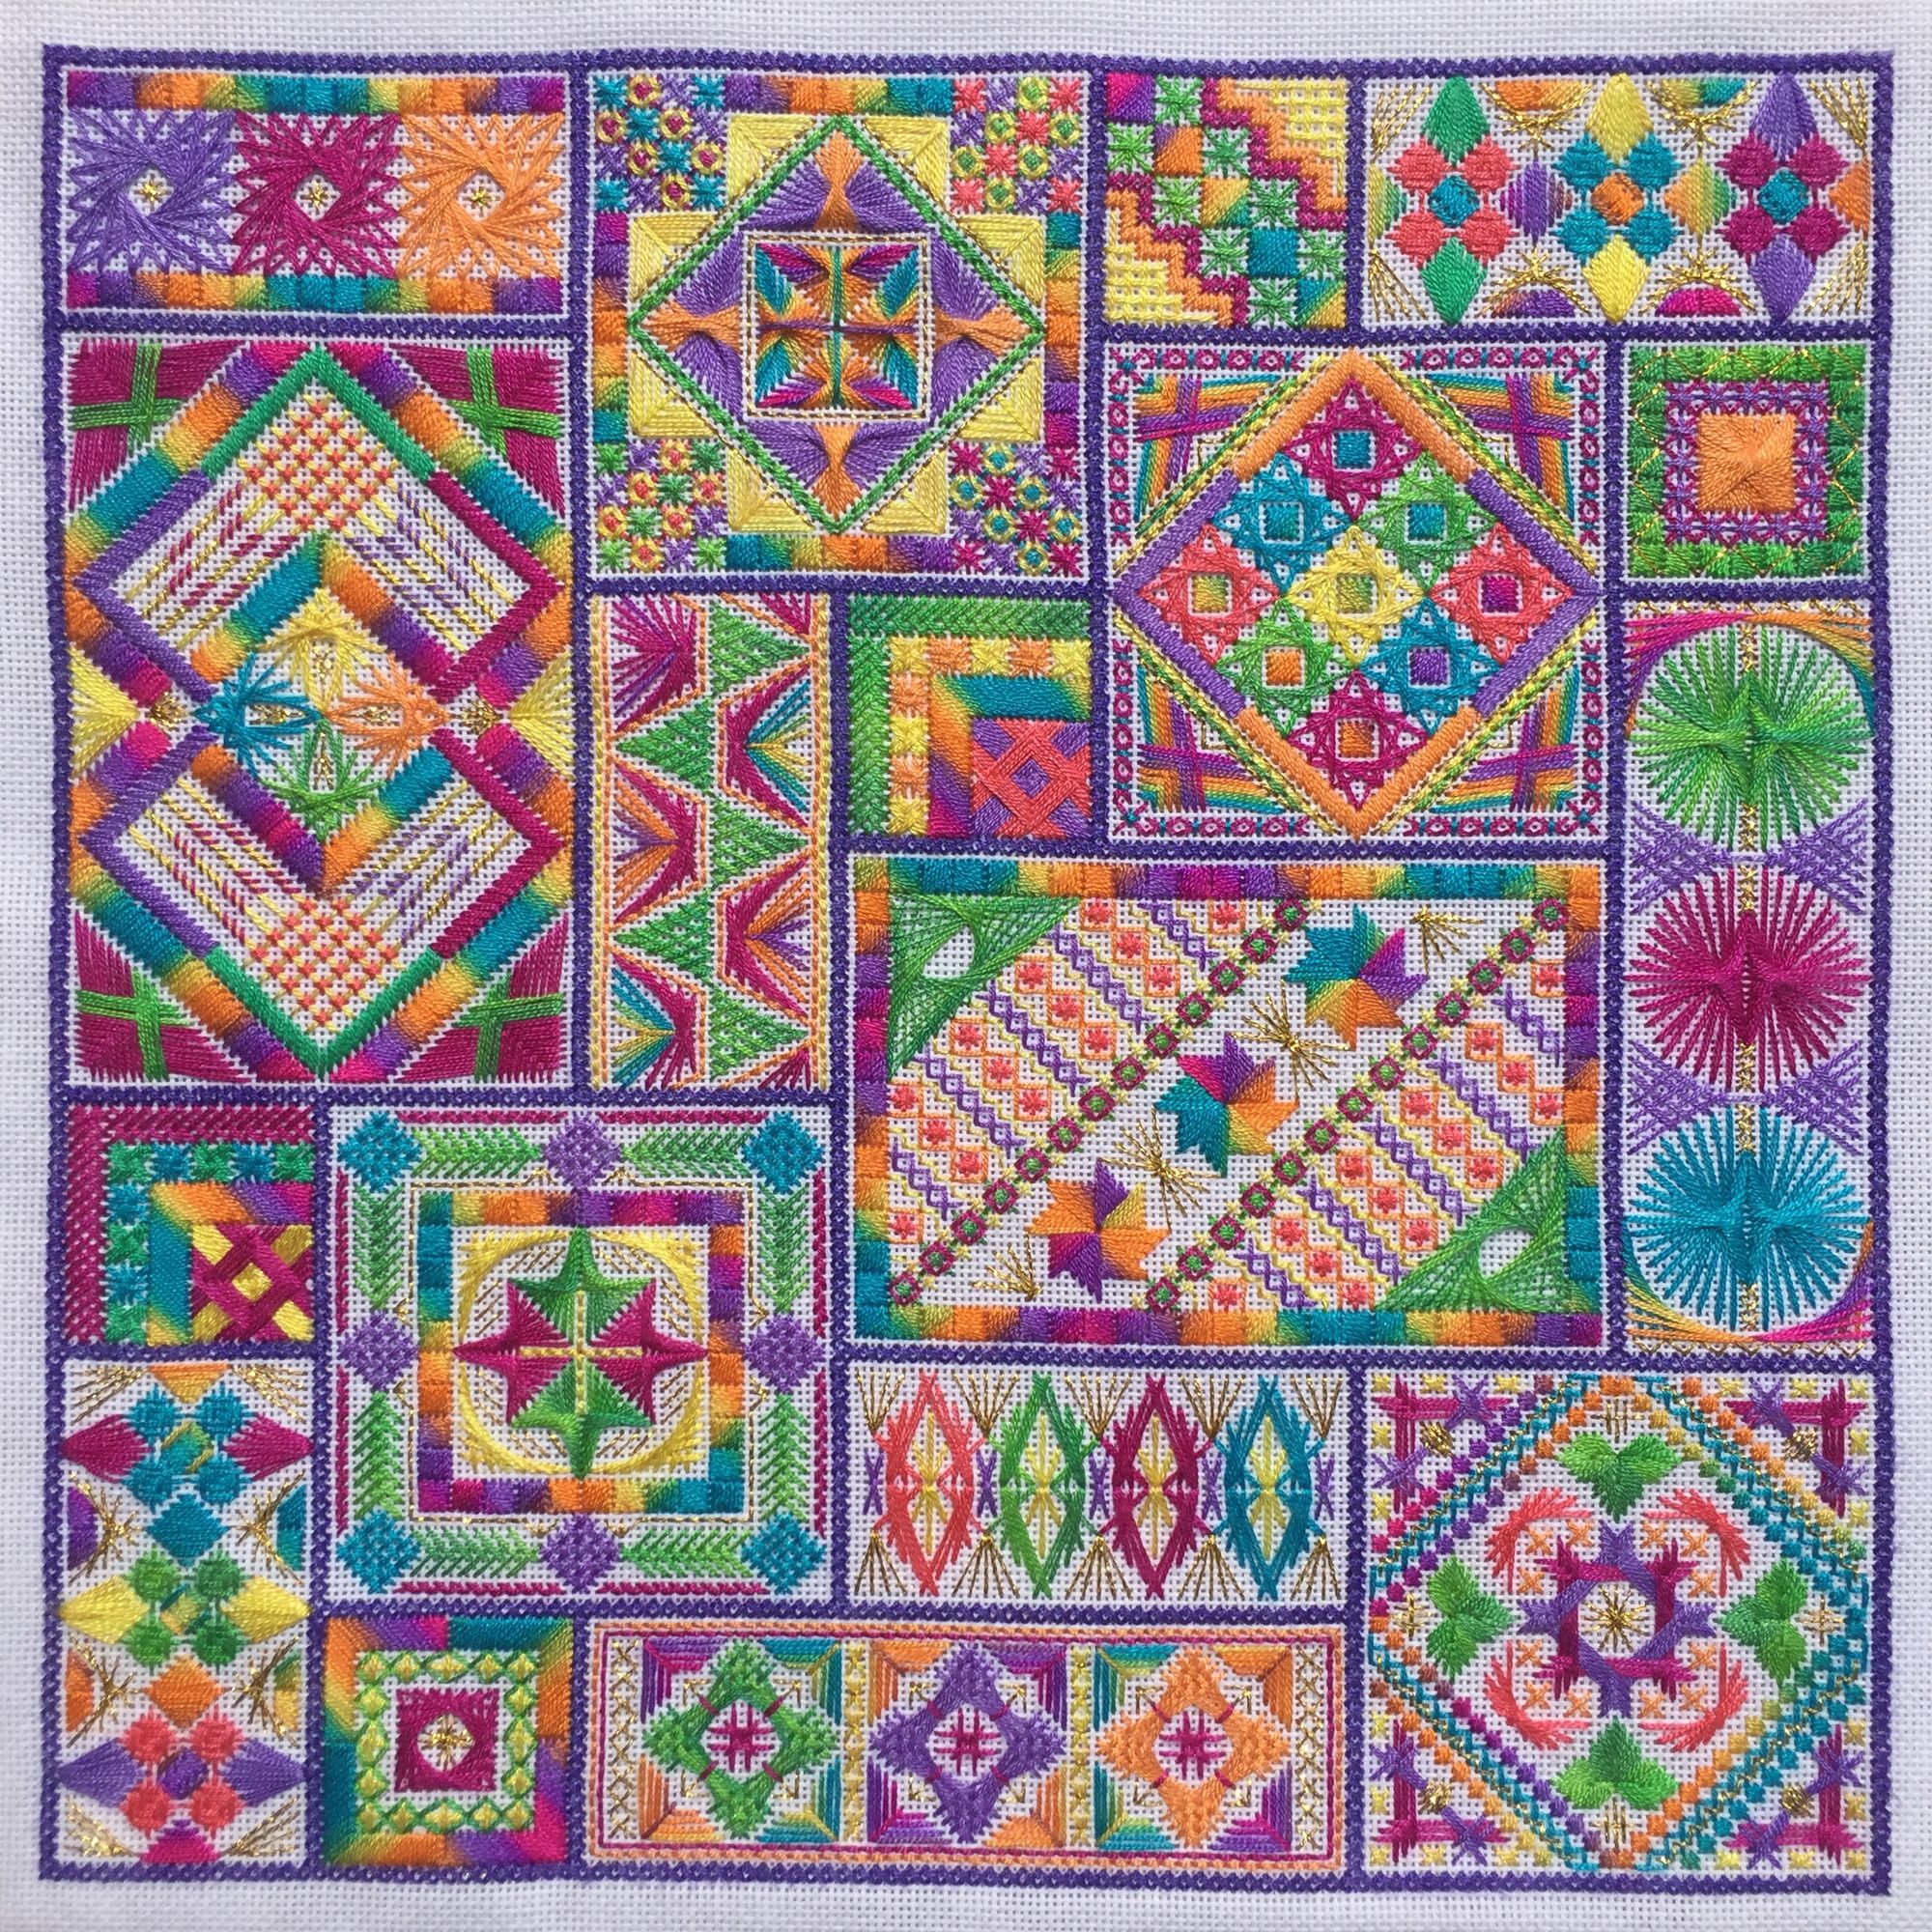 A series of embroidery patterns that work together to make a square.